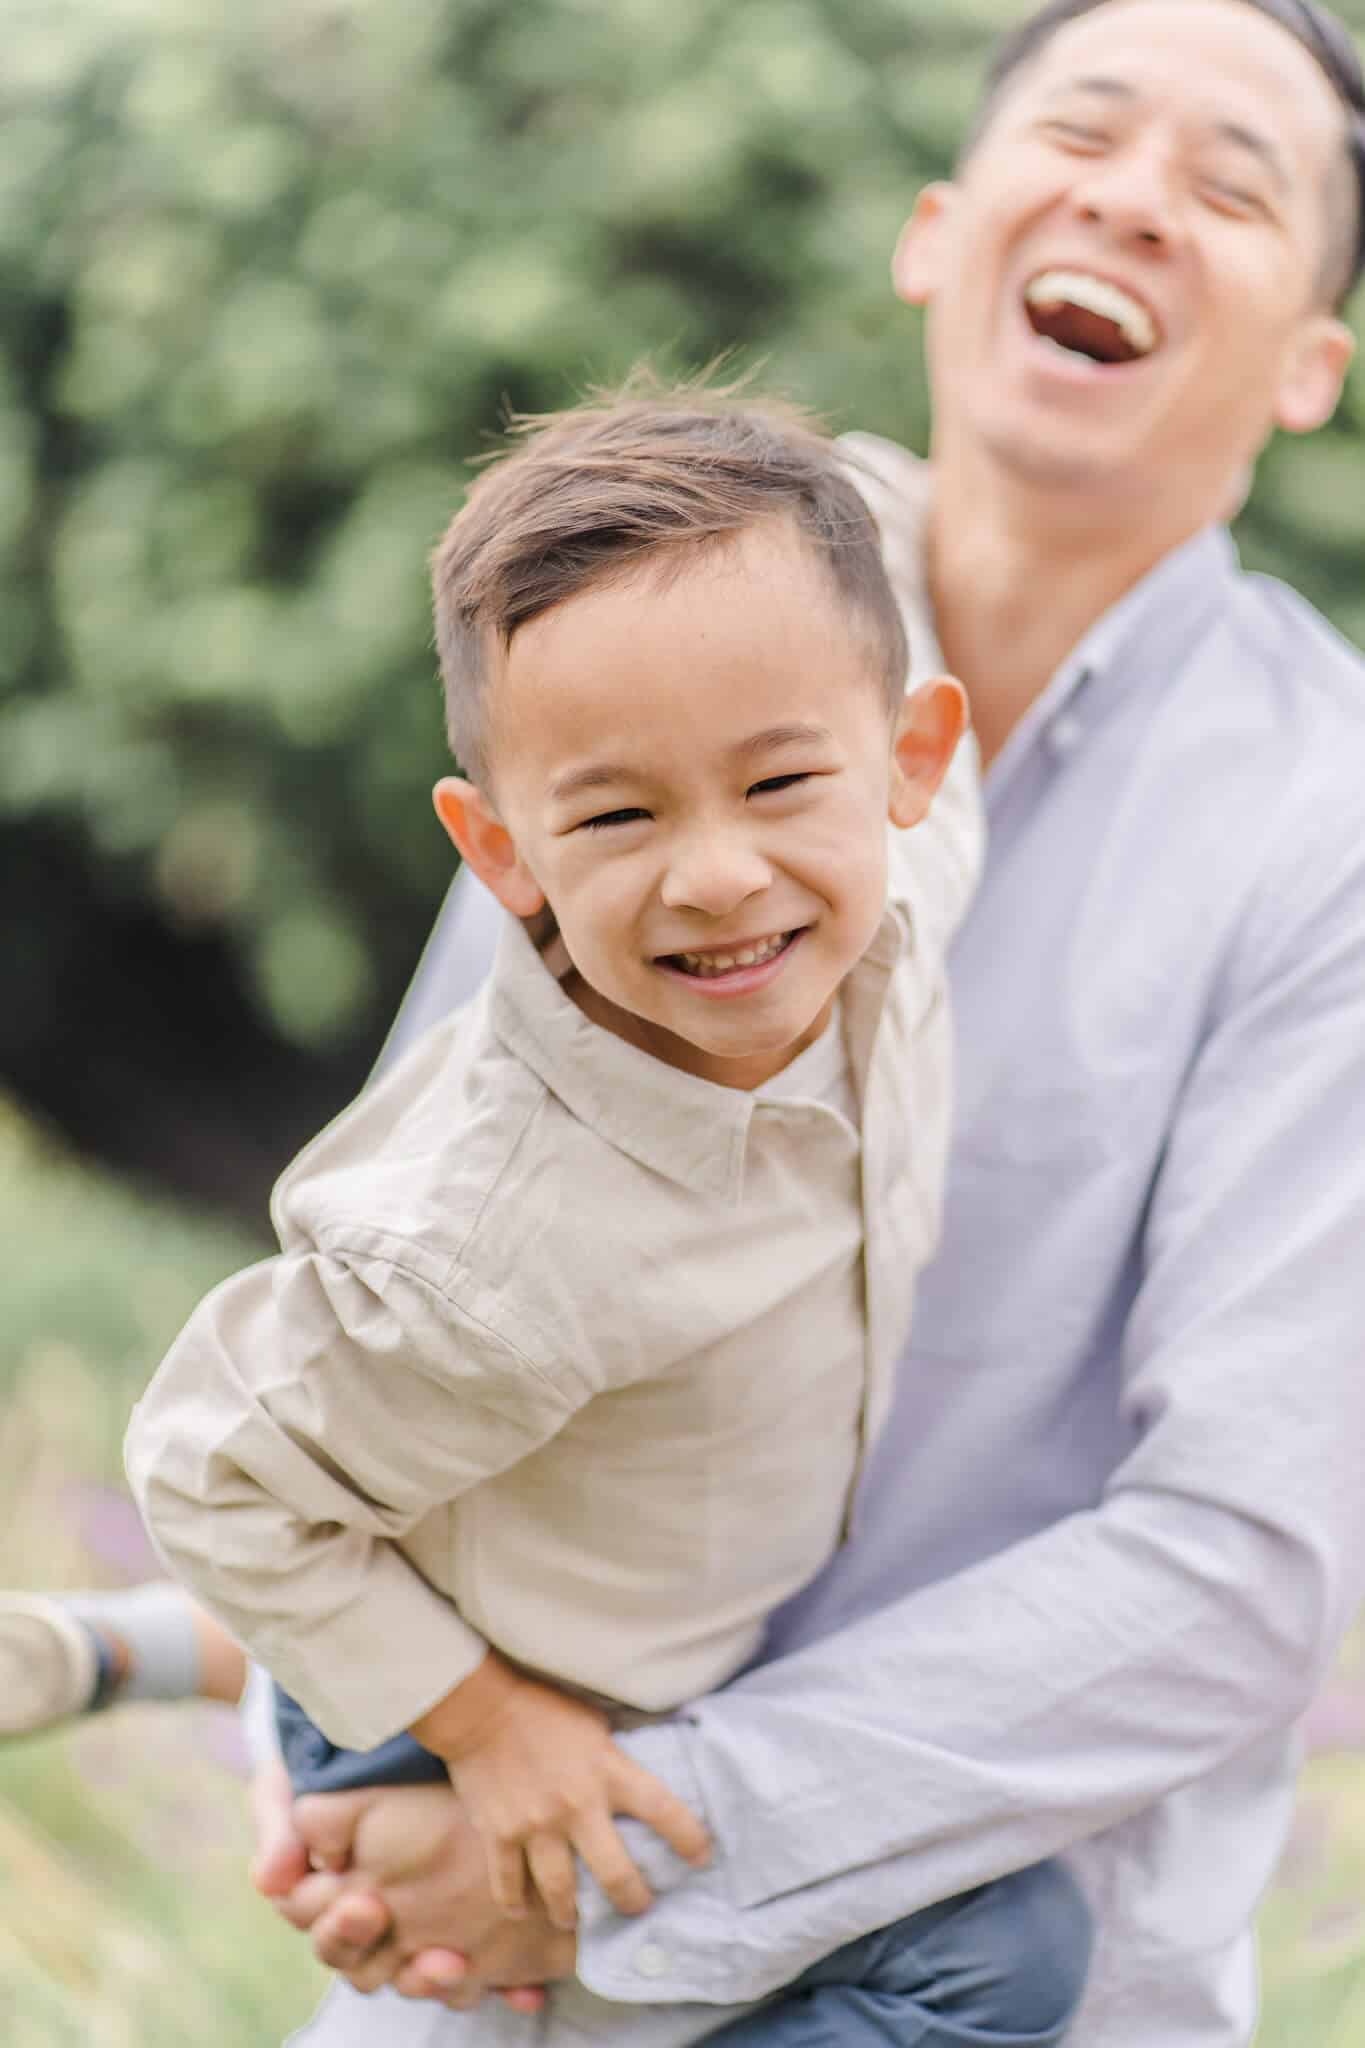 Son smiling at camera while dad is laughing in the background